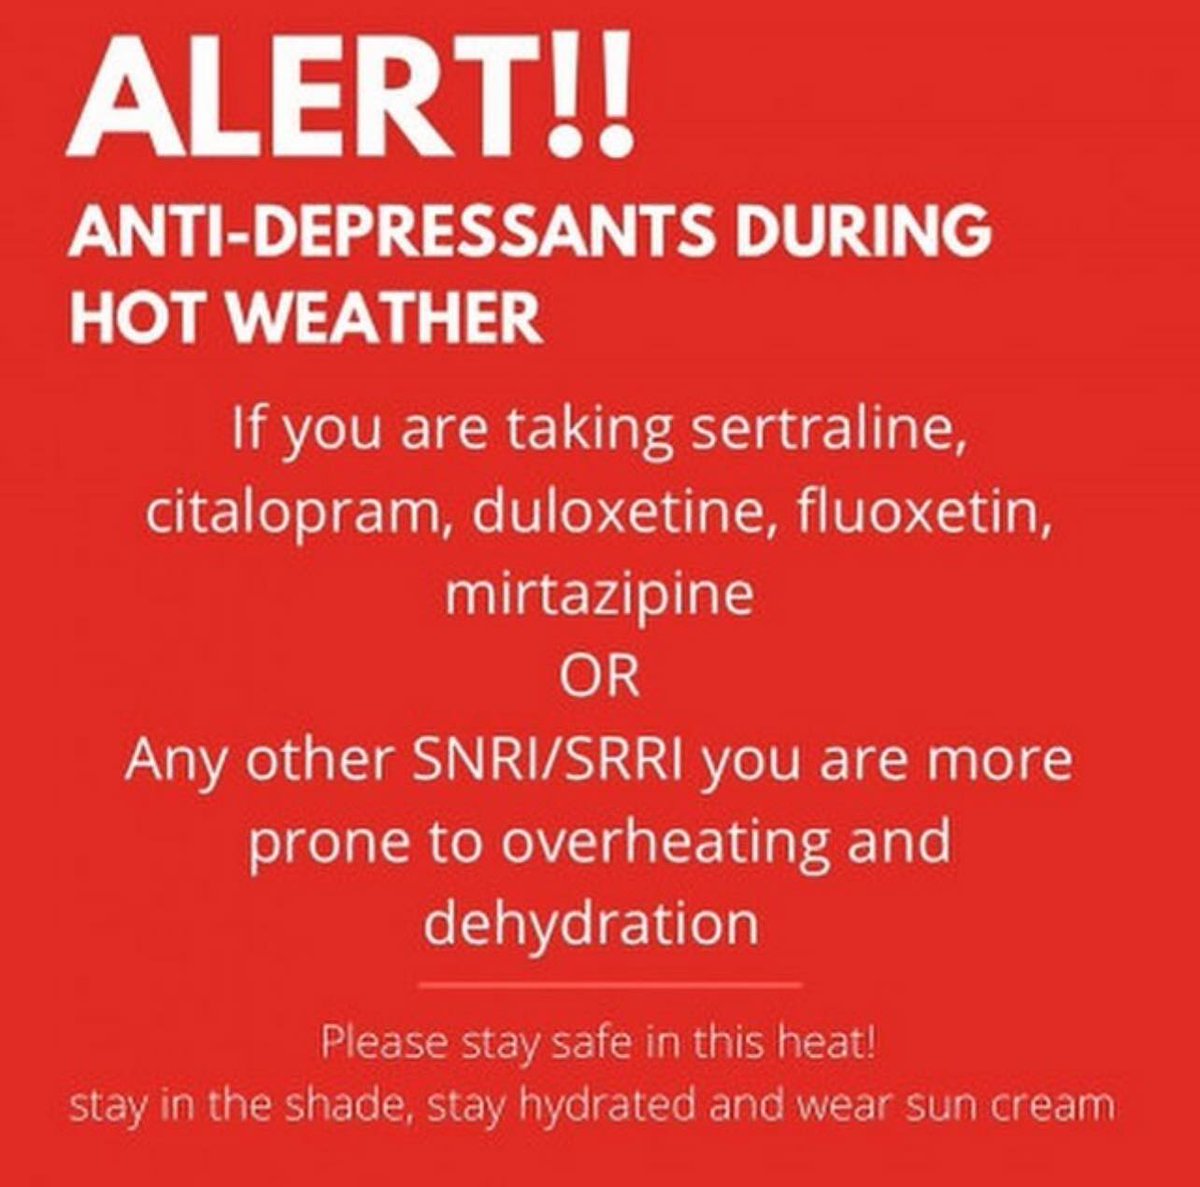 Don’t forget, antidepressants can affect us differently in the hot weather. Make sure you stay safe and hydrated!